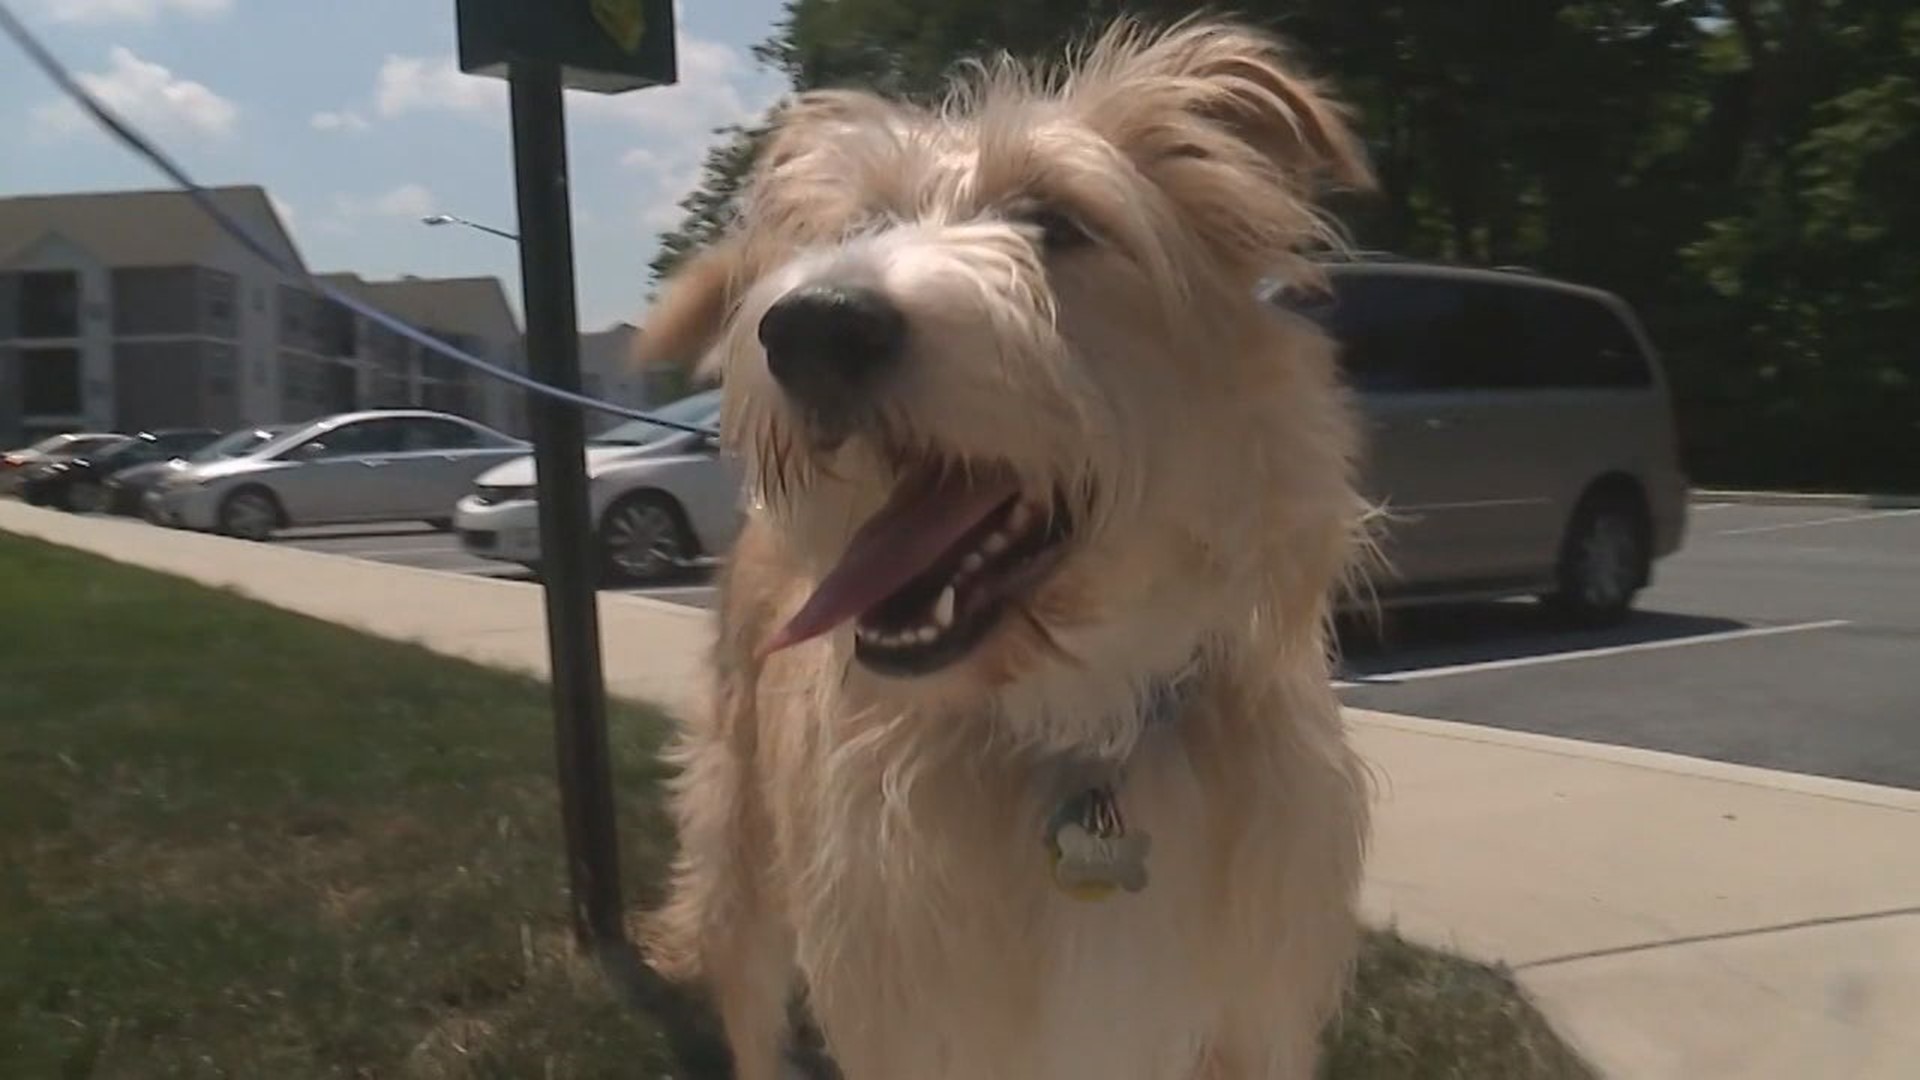 Experts are reminding people about the warning signs of overheating in pets. Dogs can suffer a heatstroke in a matter of minutes.